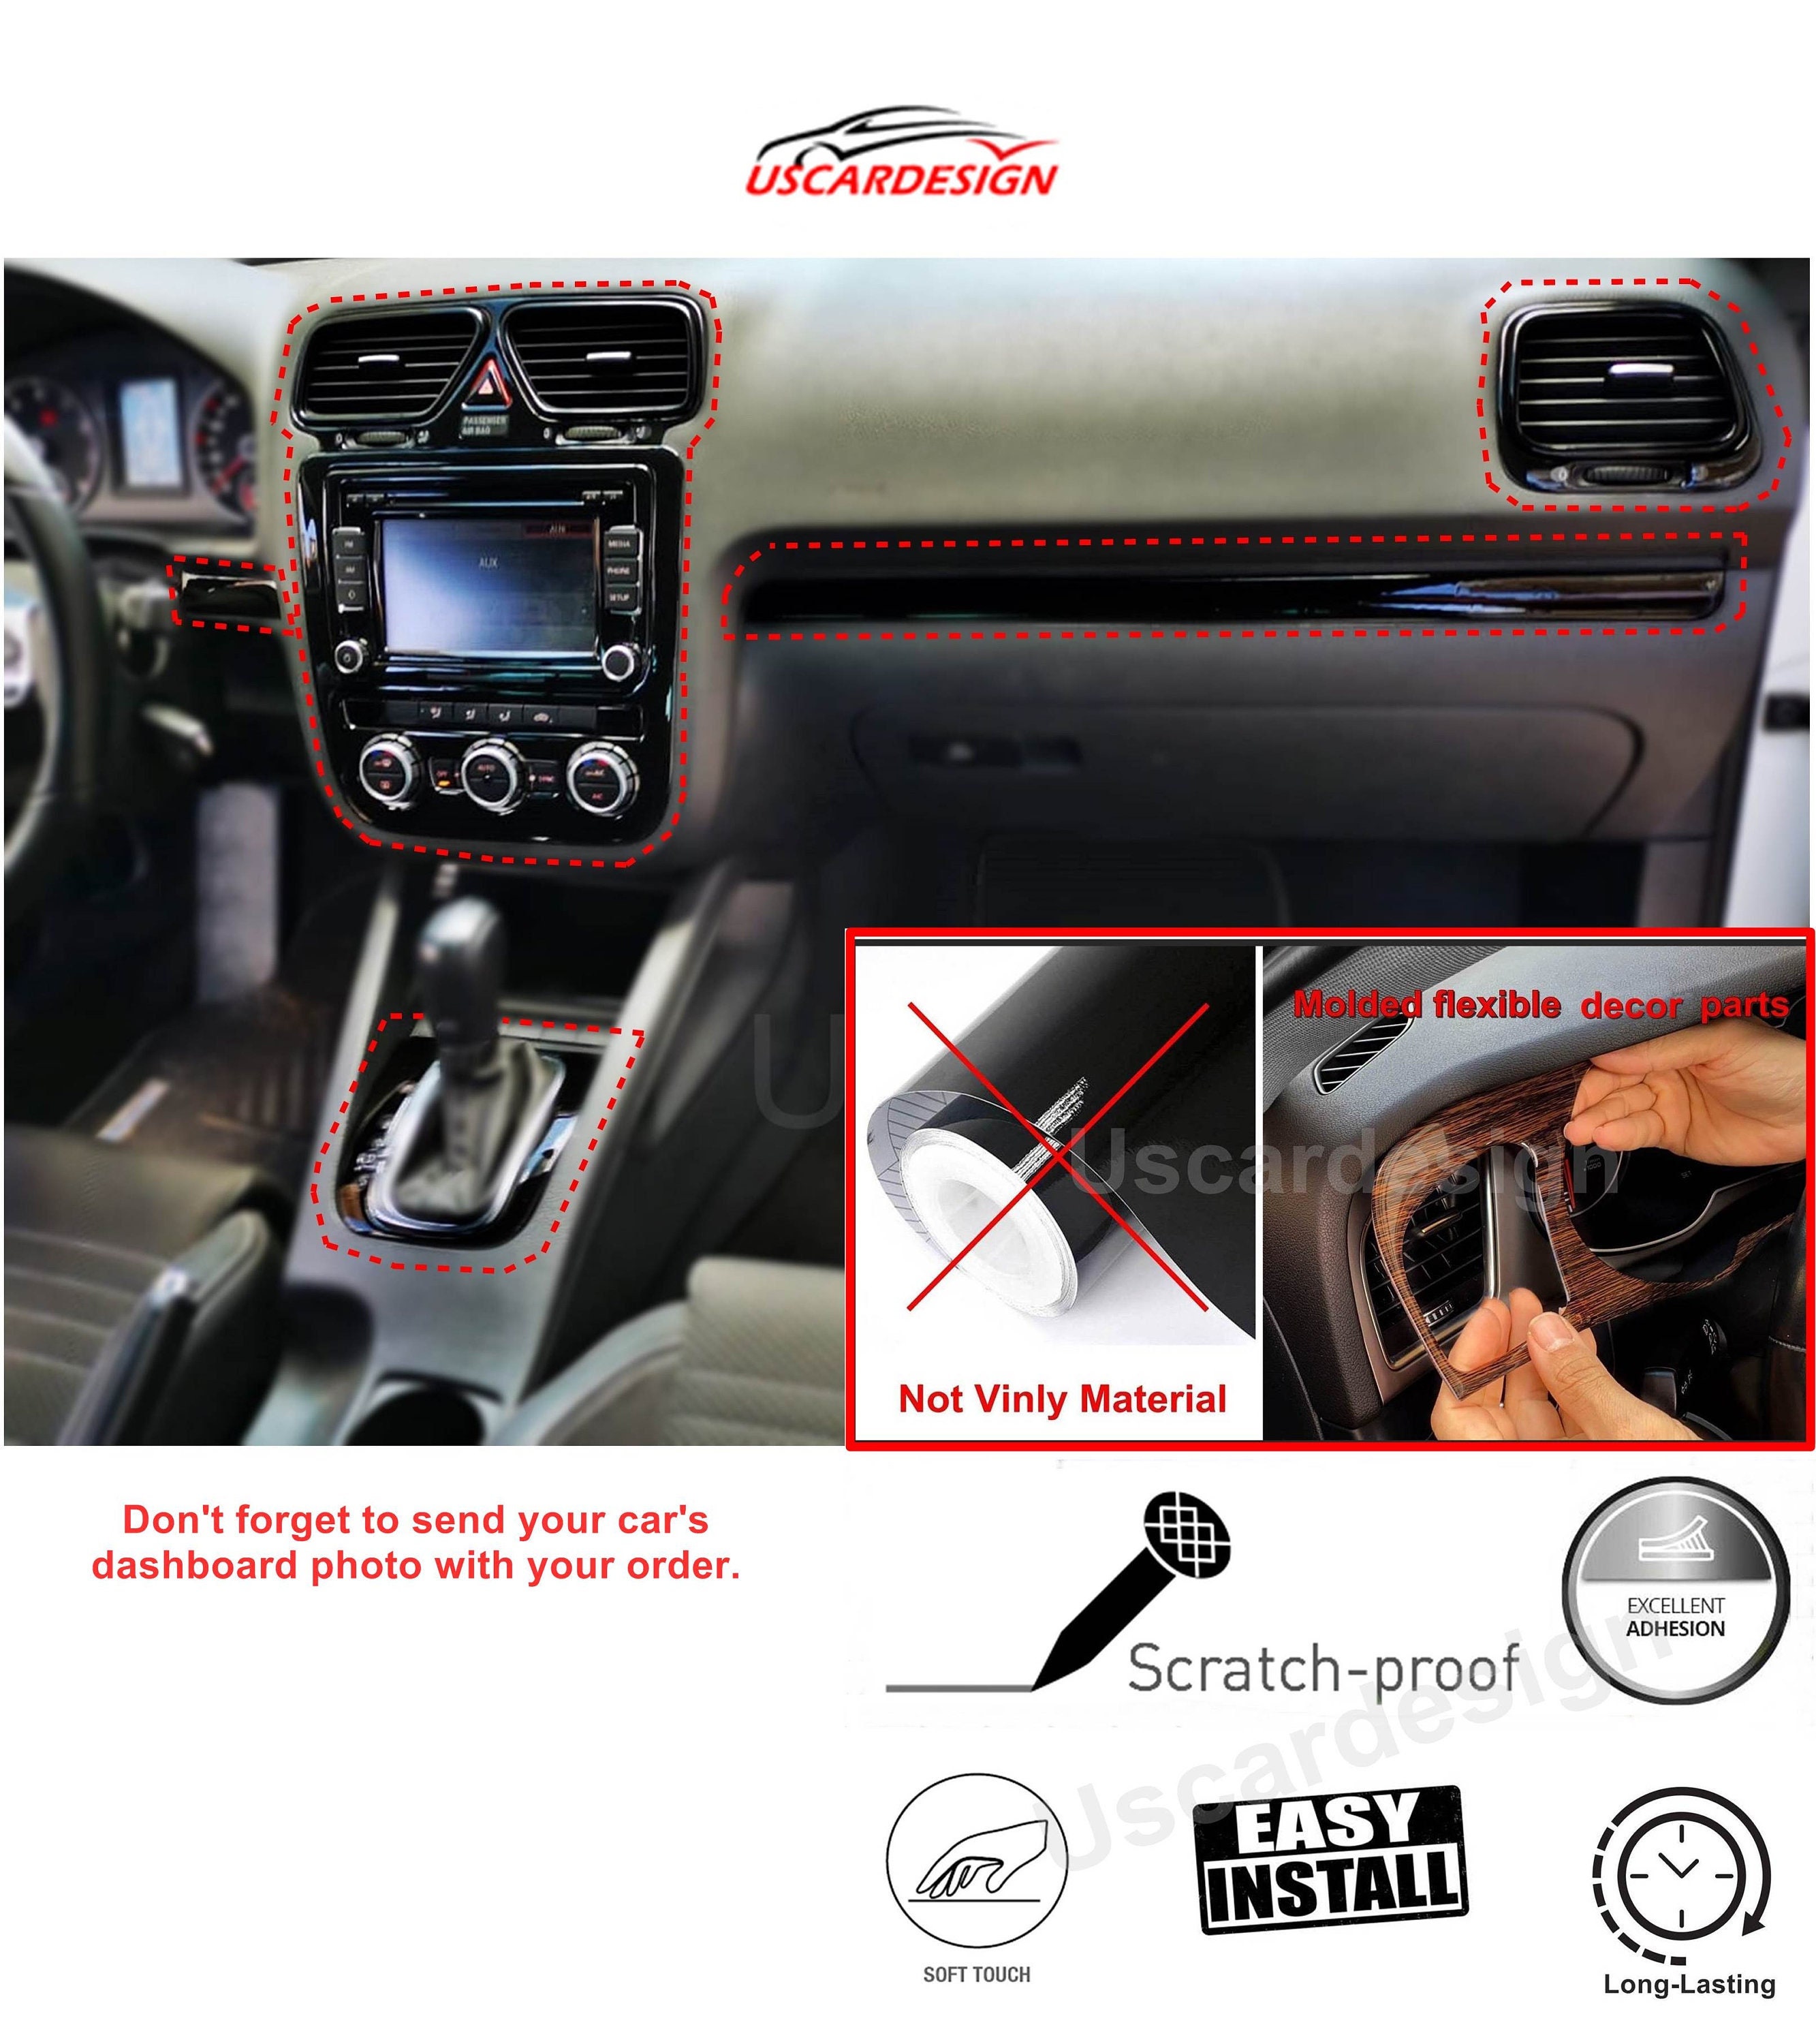 Full Styling for VW Sirocco Dashboard Cover -